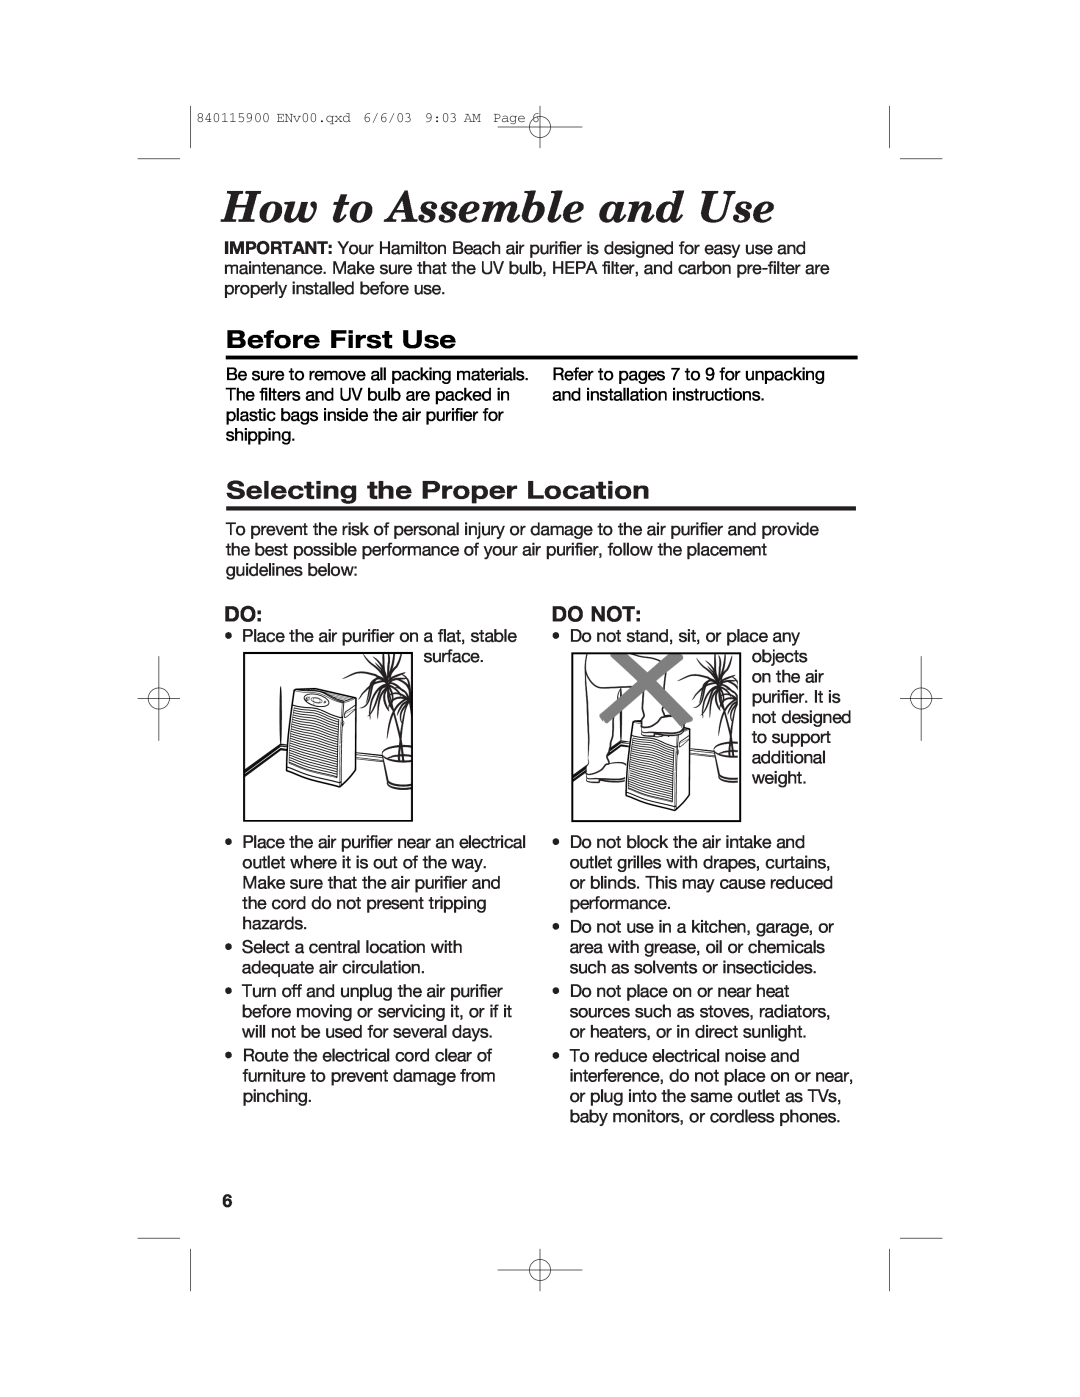 Hamilton Beach 840115900 manual How to Assemble and Use, Before First Use, Selecting the Proper Location, Do Not 